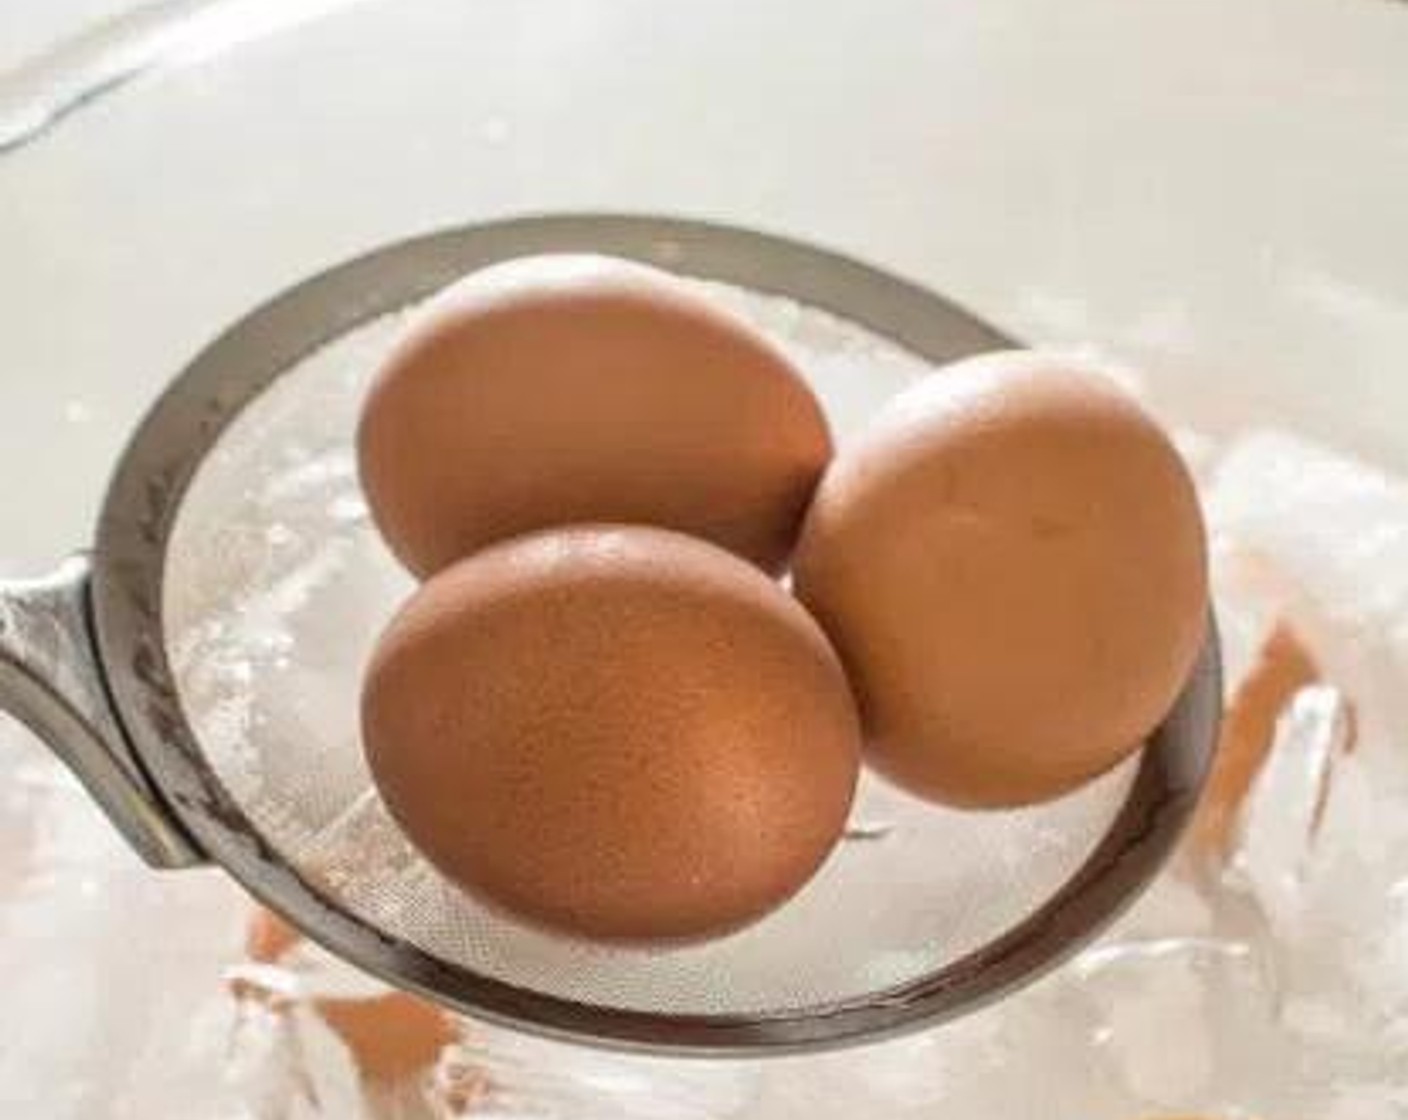 step 3 Transfer the eggs into an ice bath and allow them to chill for 3 minutes.